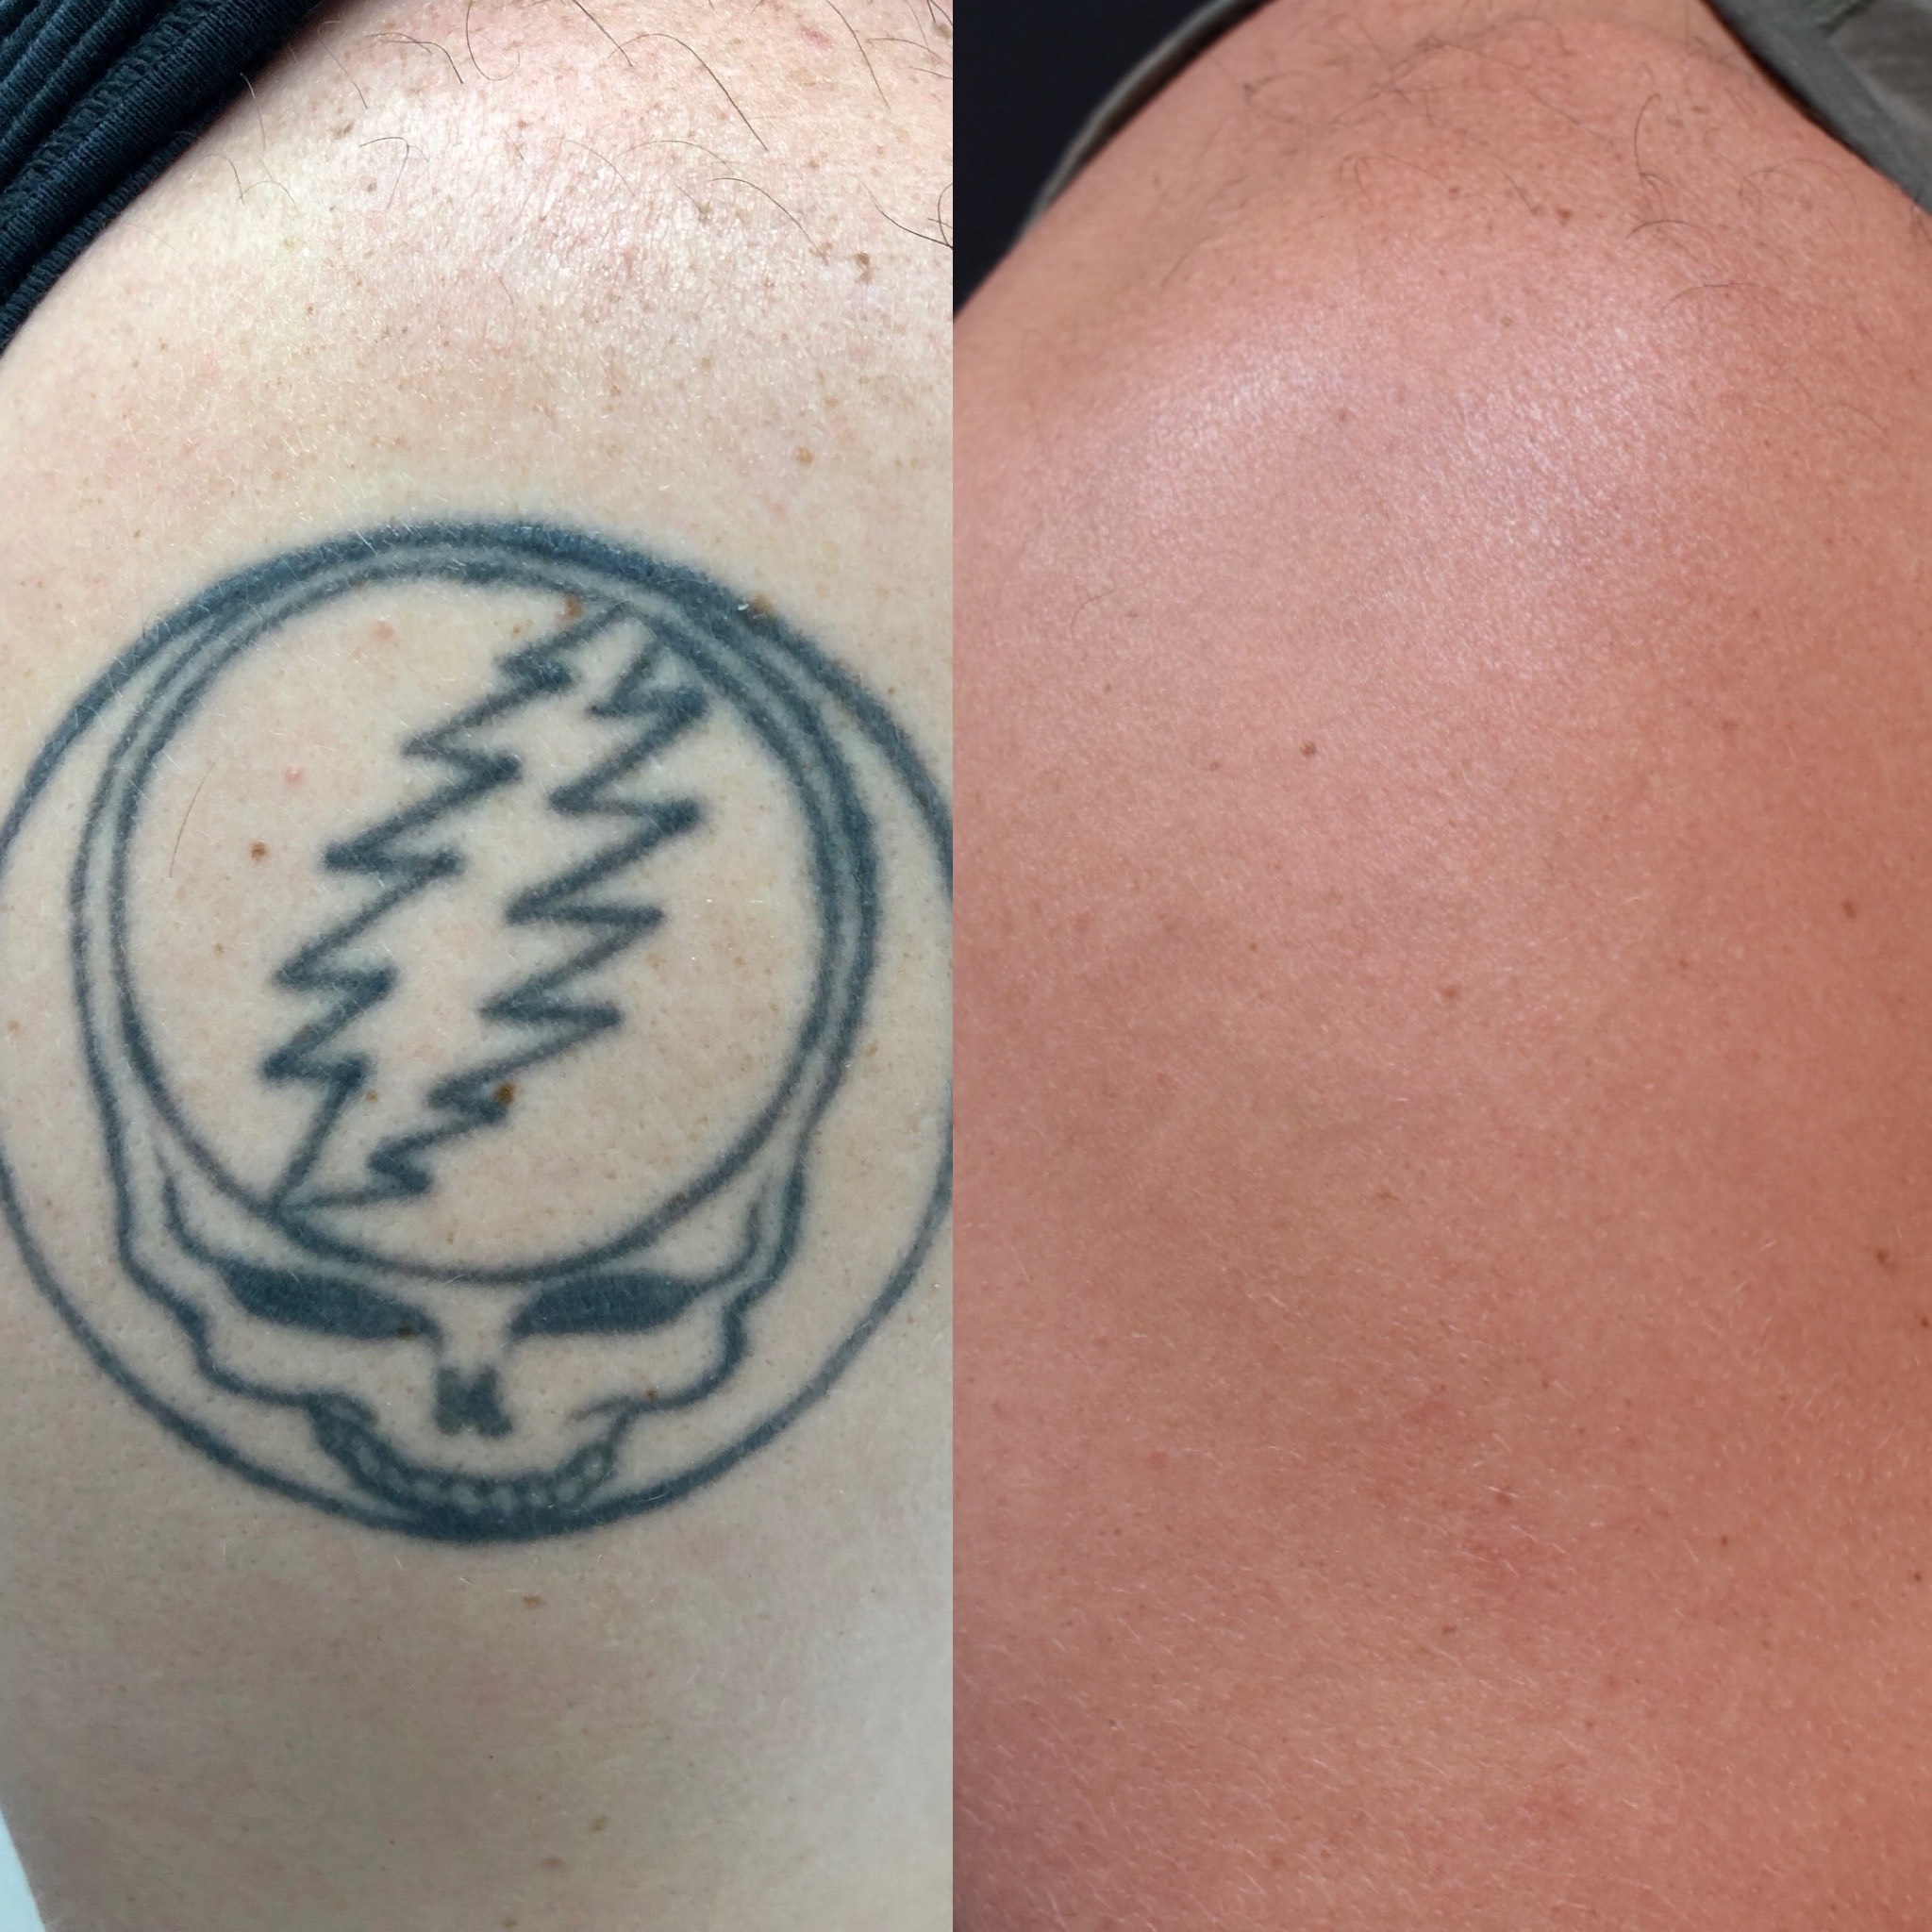 Worlds fastest tattoo removal services | Zapatat Tattoo removal